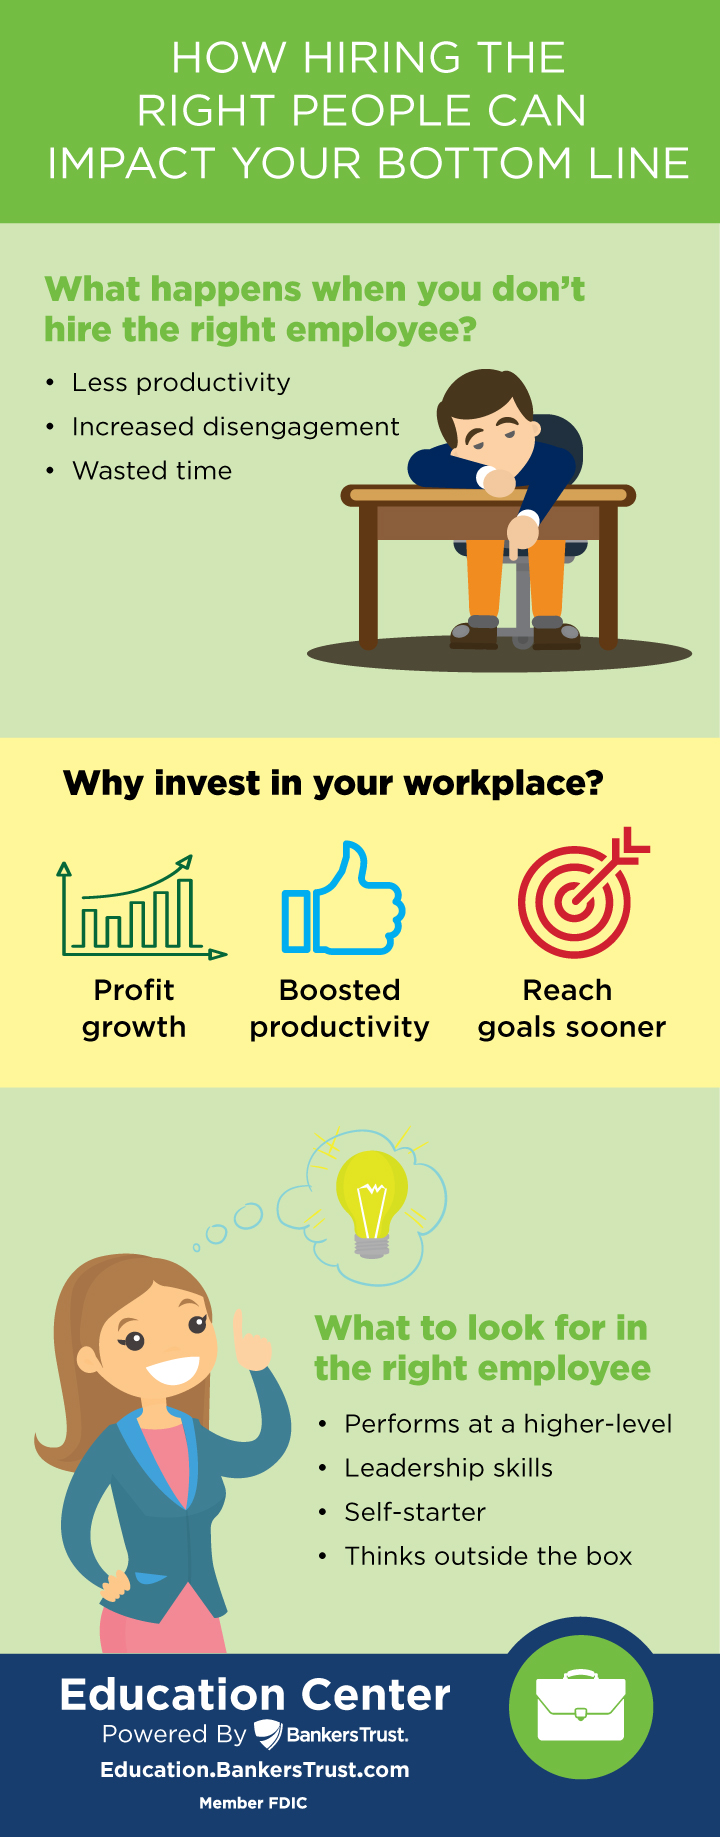 how hiring the right people can impact your bottom line infographic